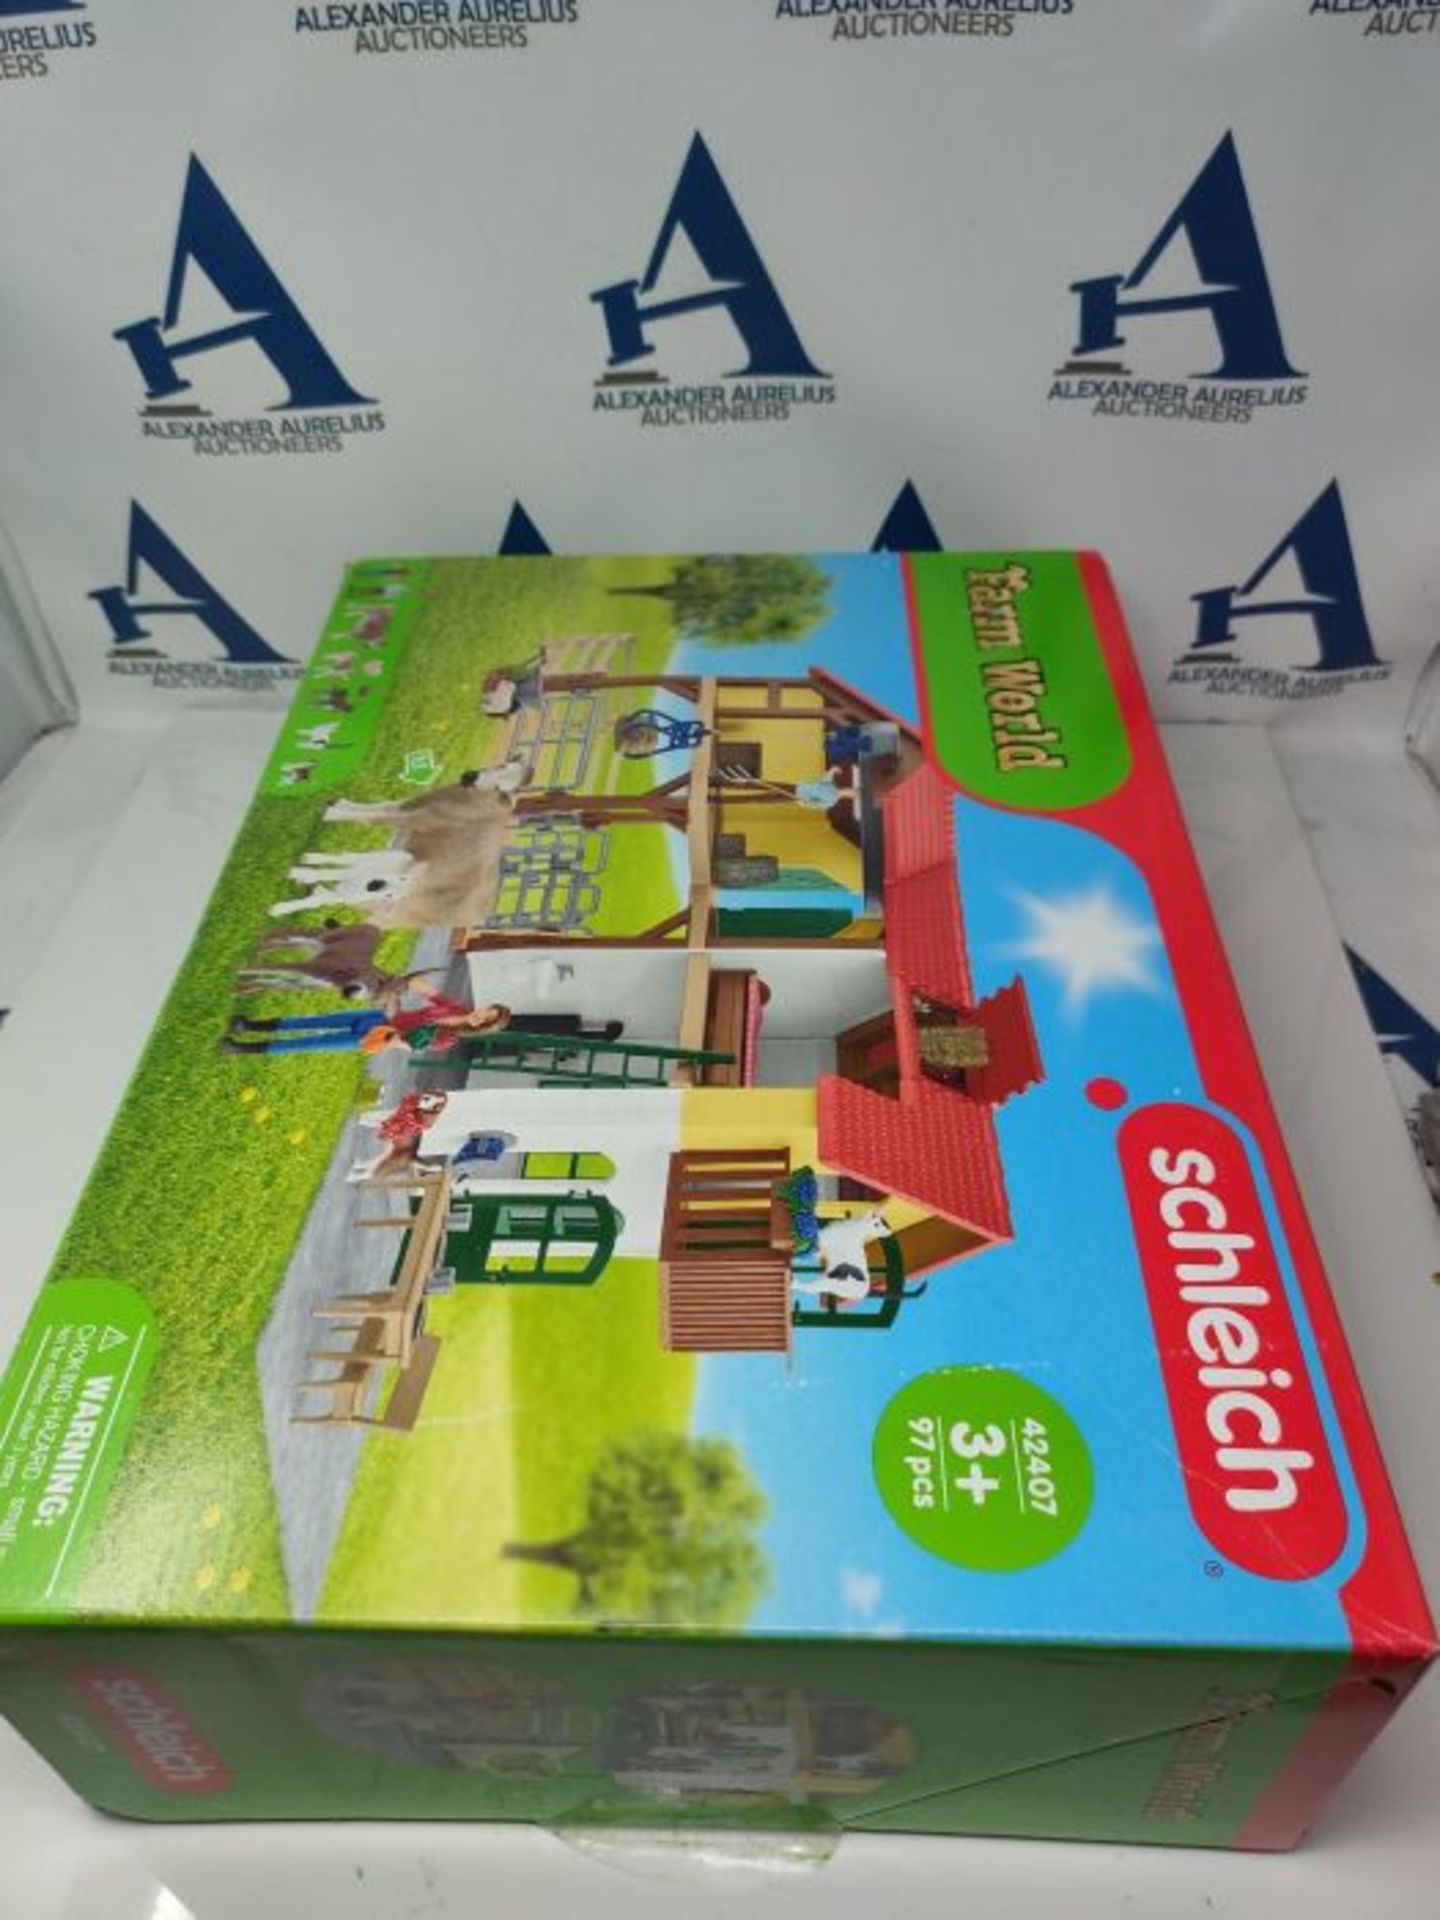 RRP £59.00 SCHLEICH 42407n Large Farm House Farm World Toy Playset for children aged 3-8 Years - Image 2 of 3